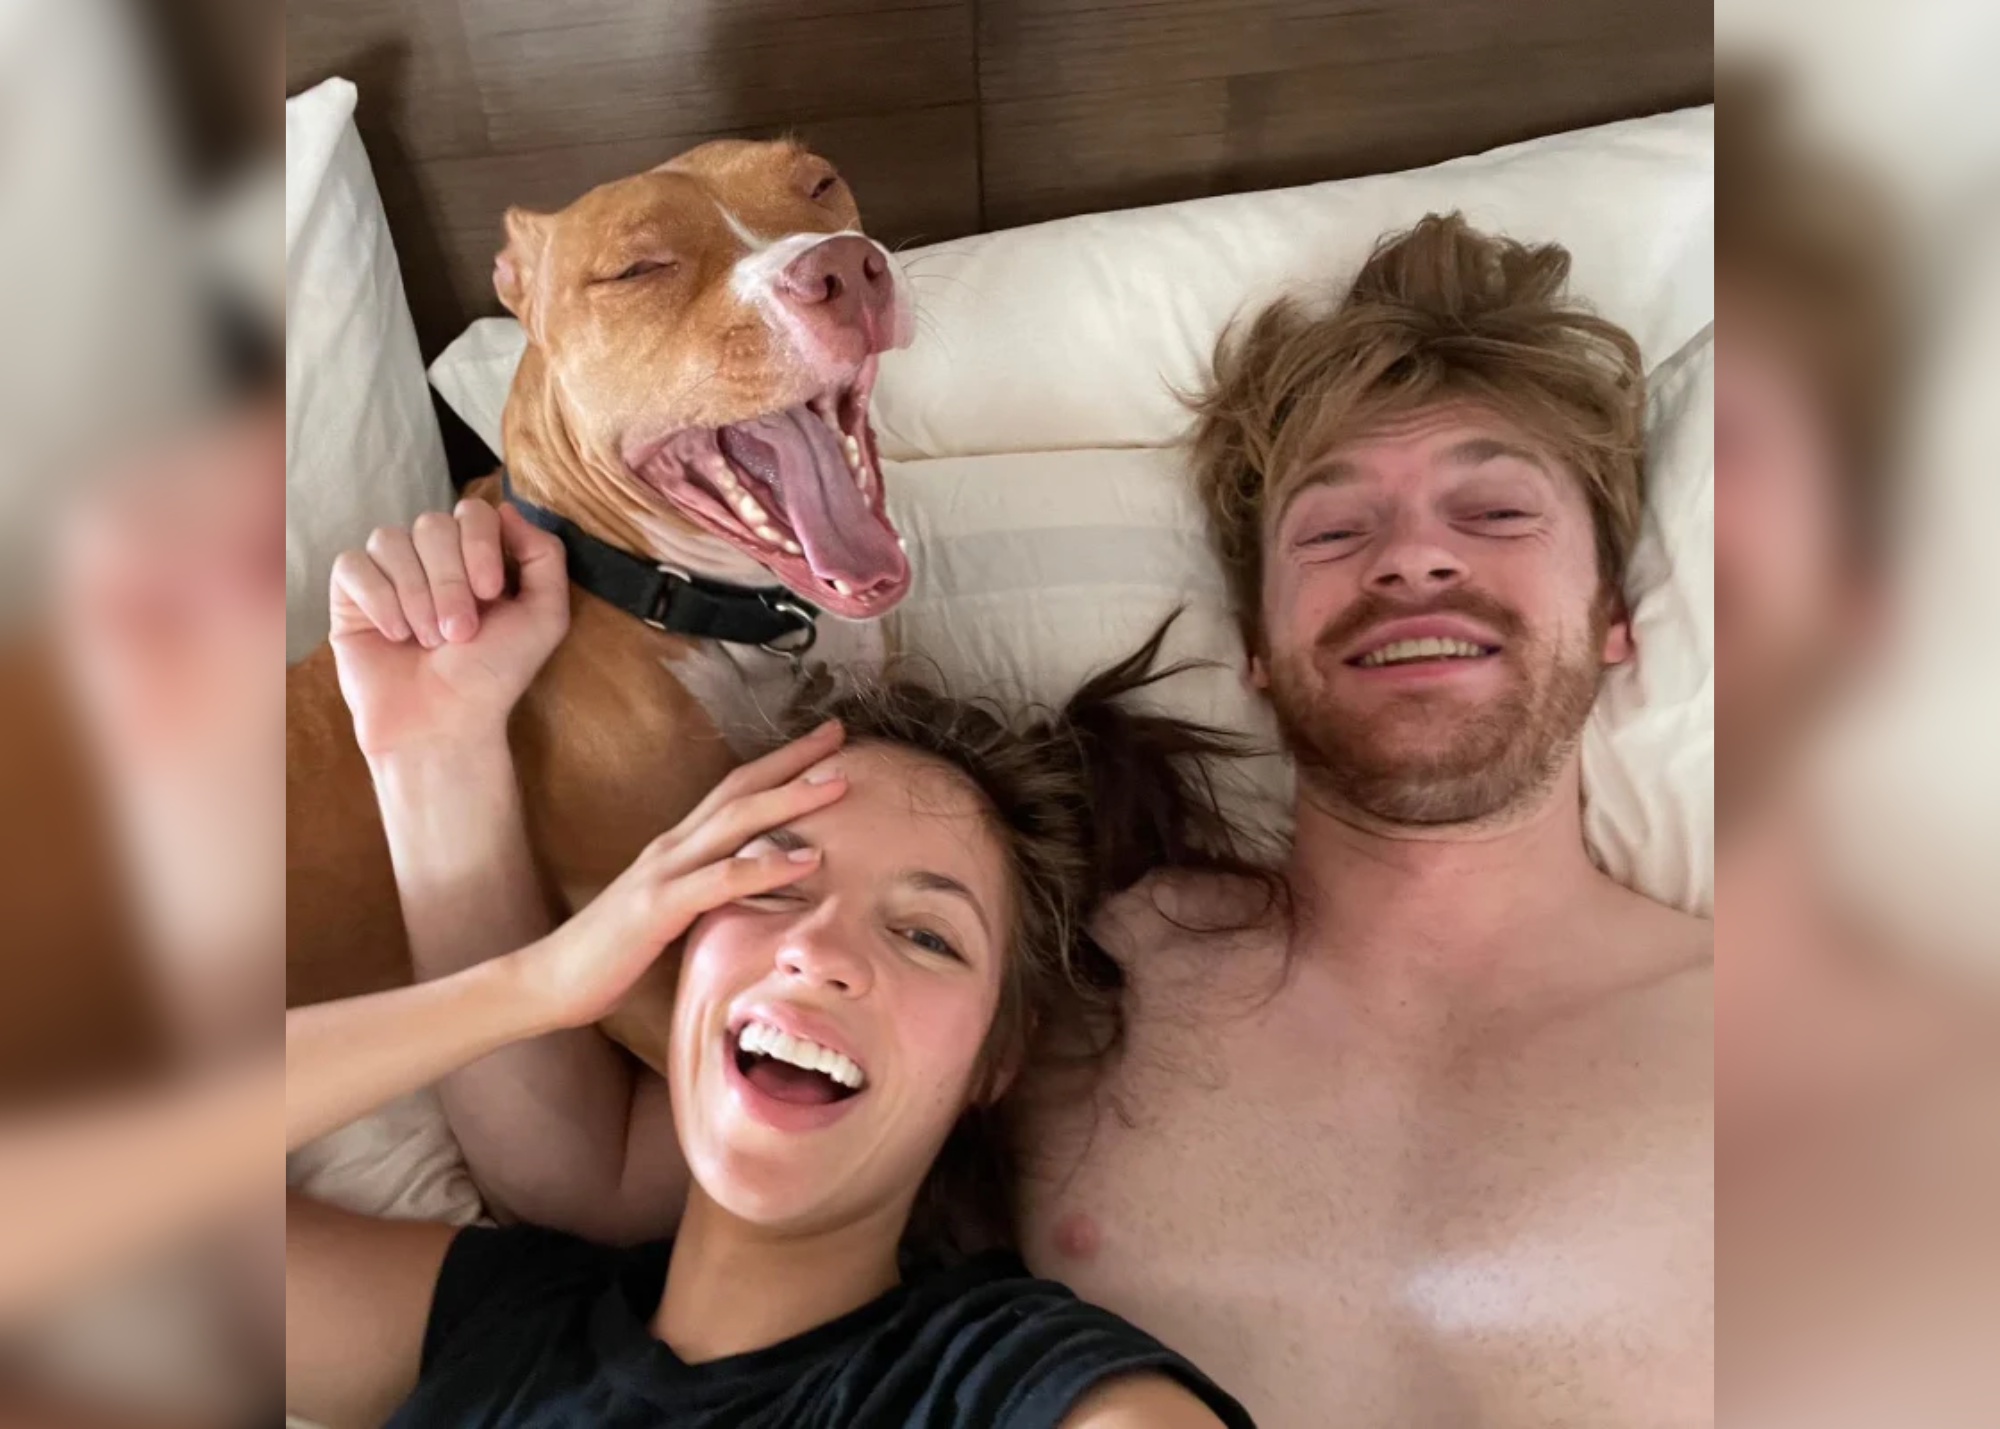 Under the bed is Finneas and her girlfriend, Claudia Sulewski with his Dog named "Peachpit"